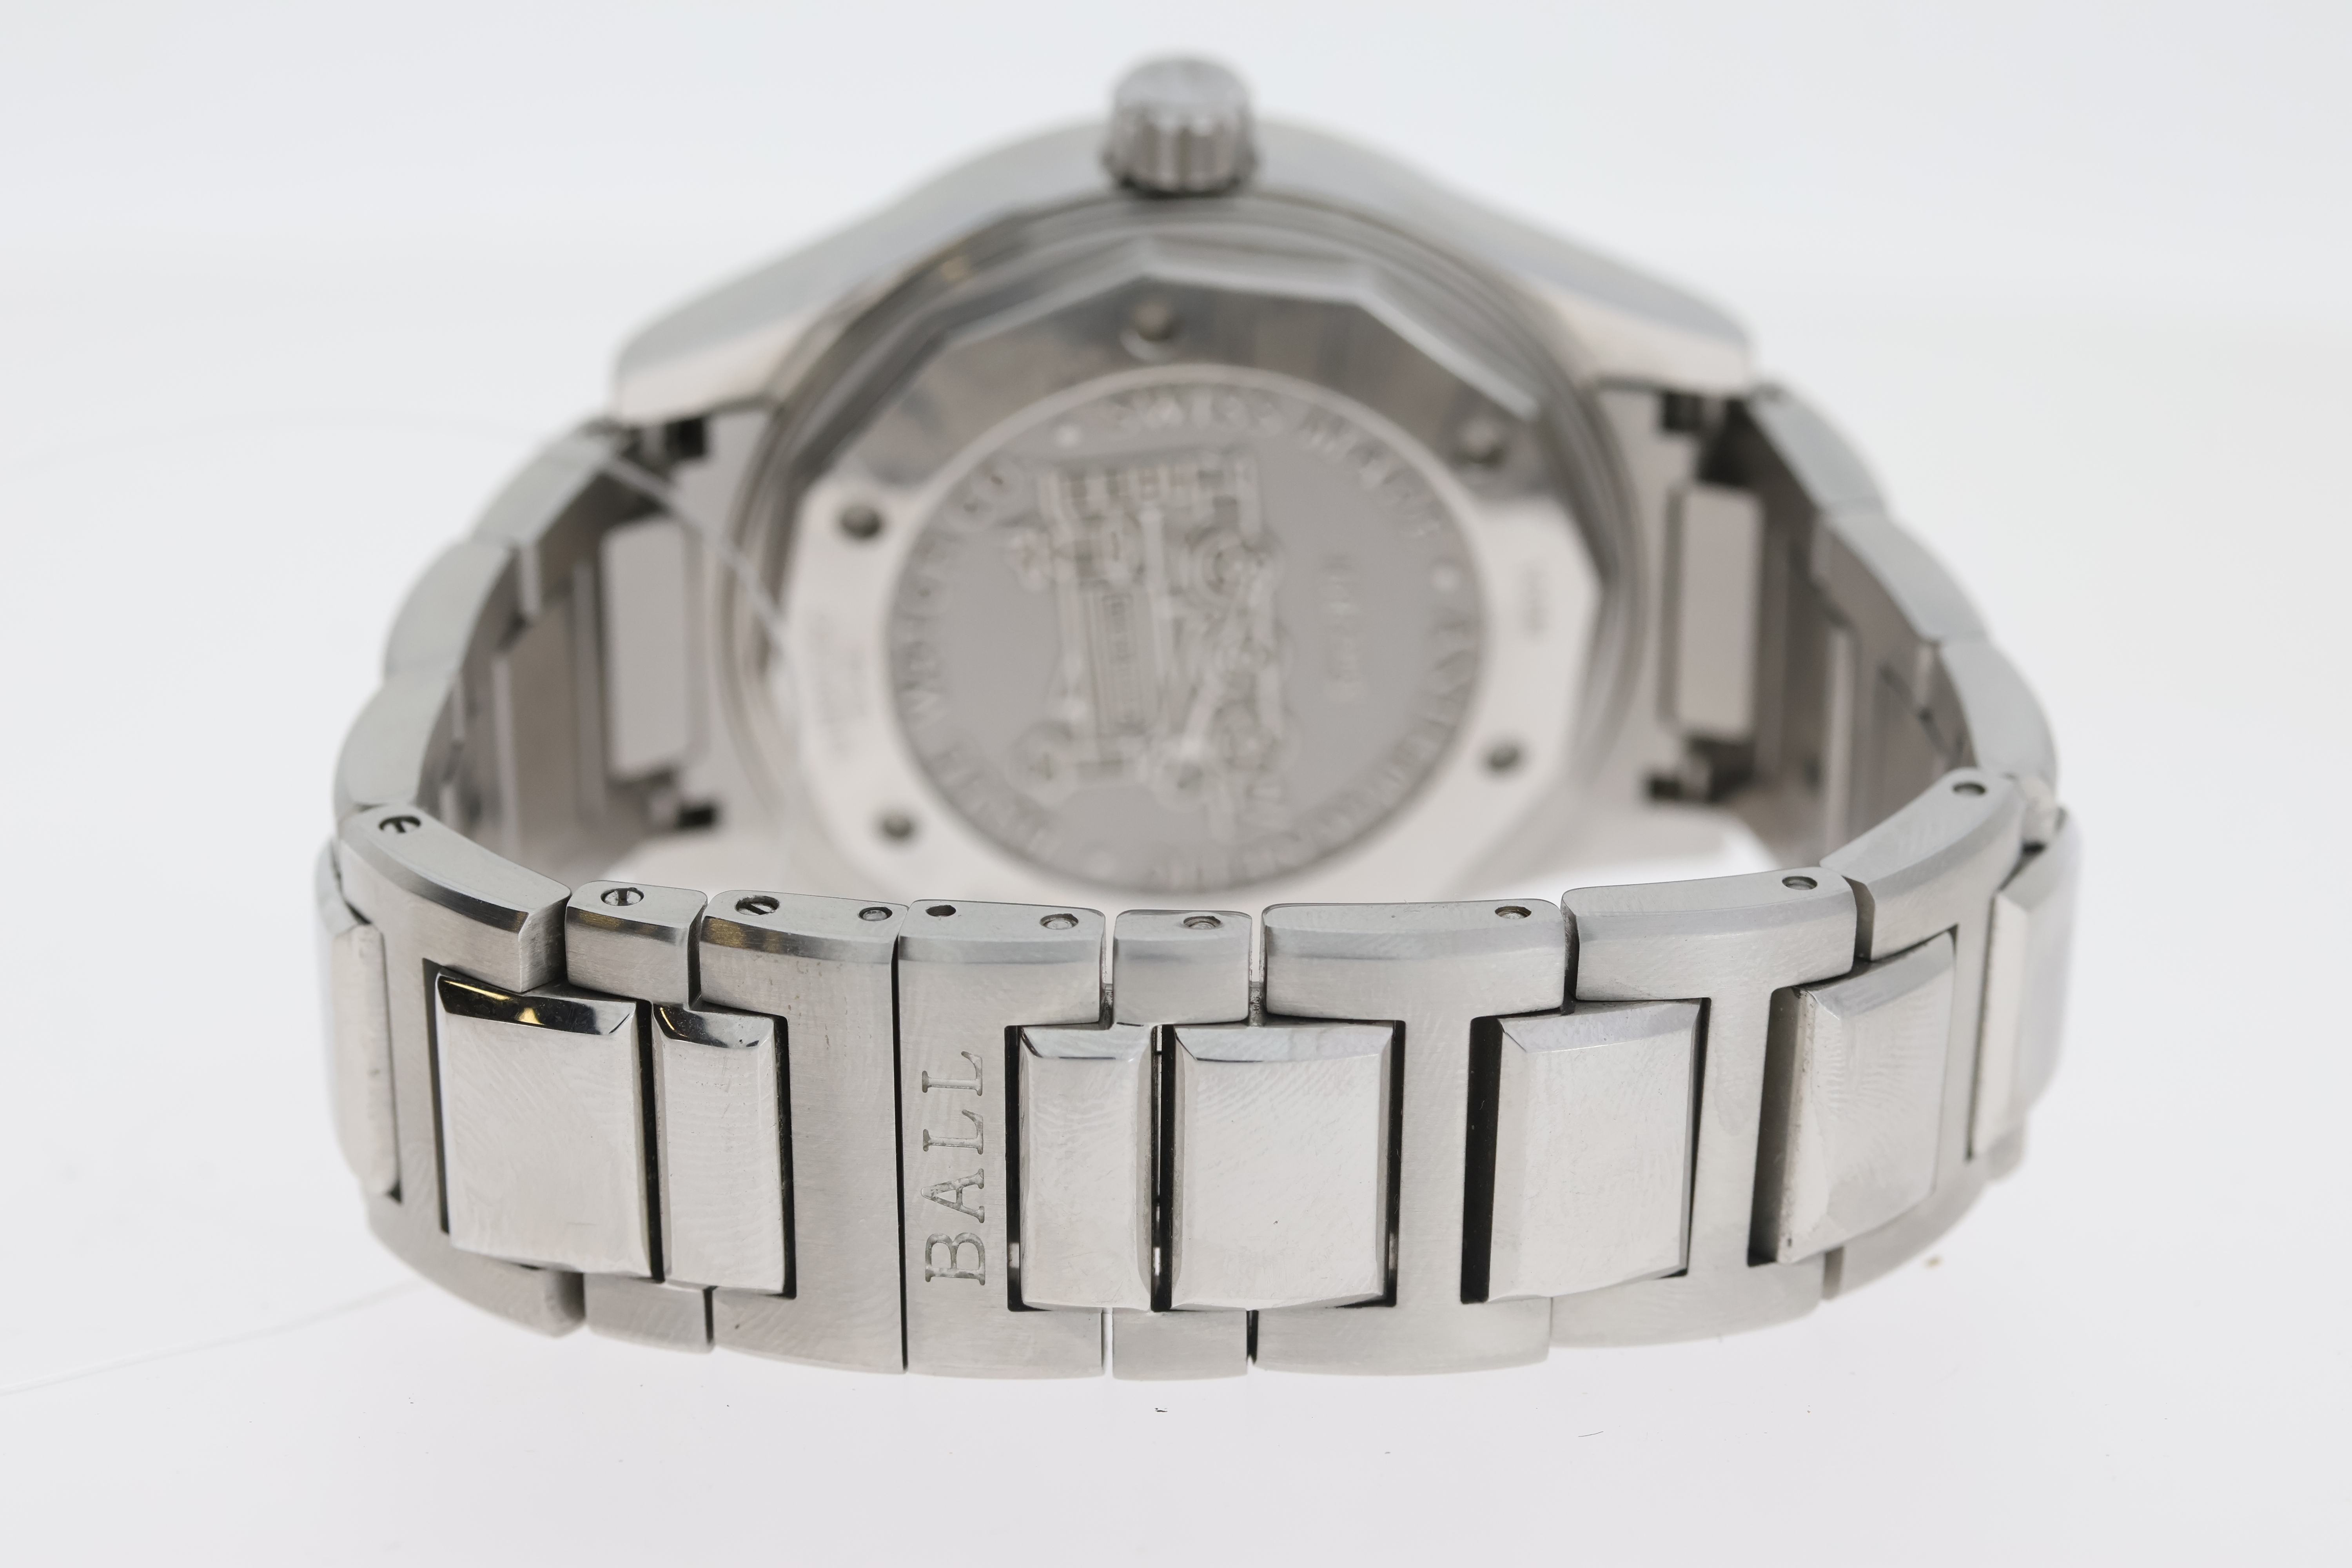 Ball Engineer III Maverlight Date Automatic with box and Papers - Image 5 of 6